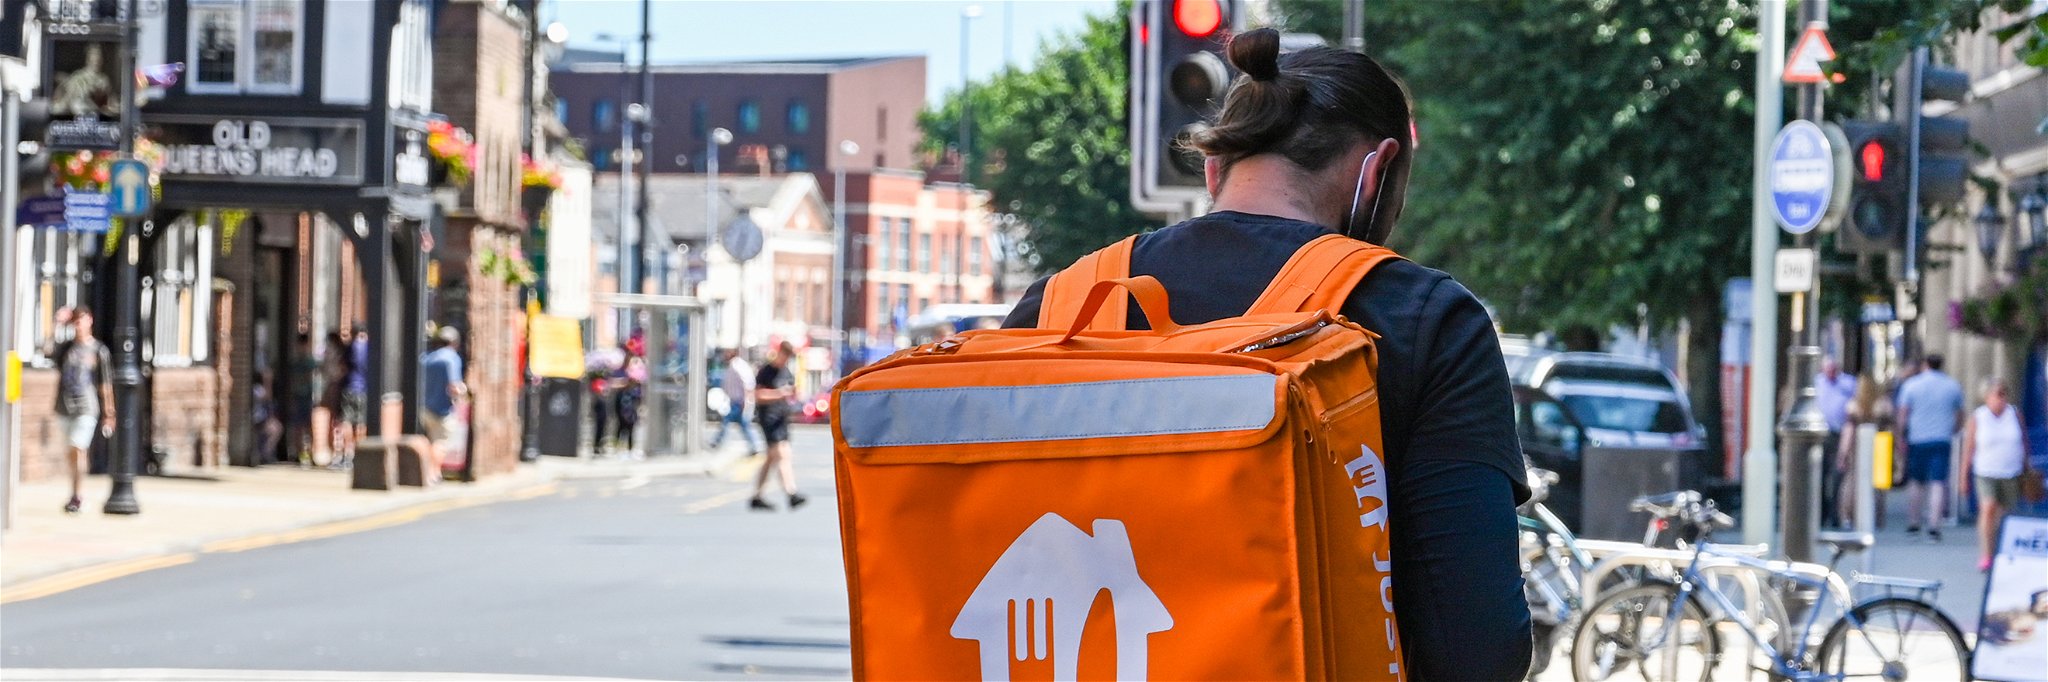 Just Eat will deliver Sainsbury’s groceries.